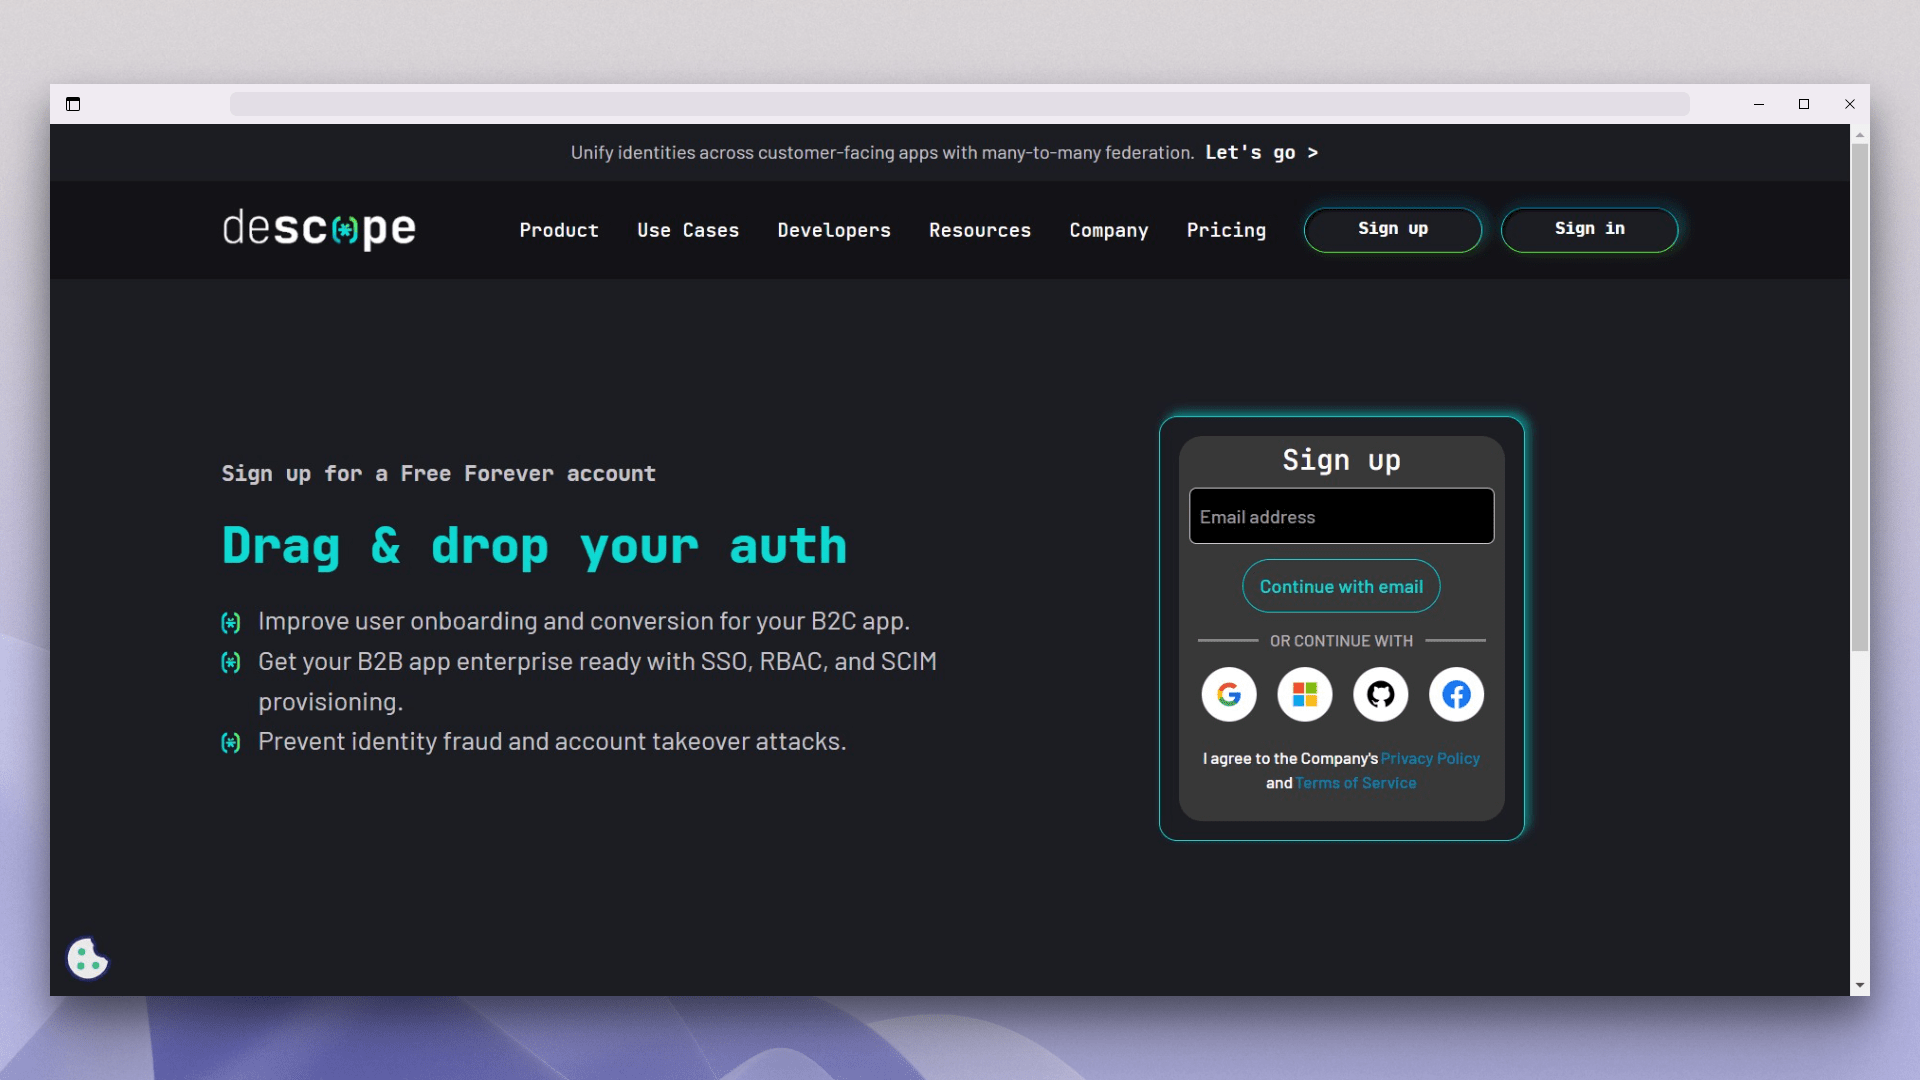 React OAuth Descope sign-up